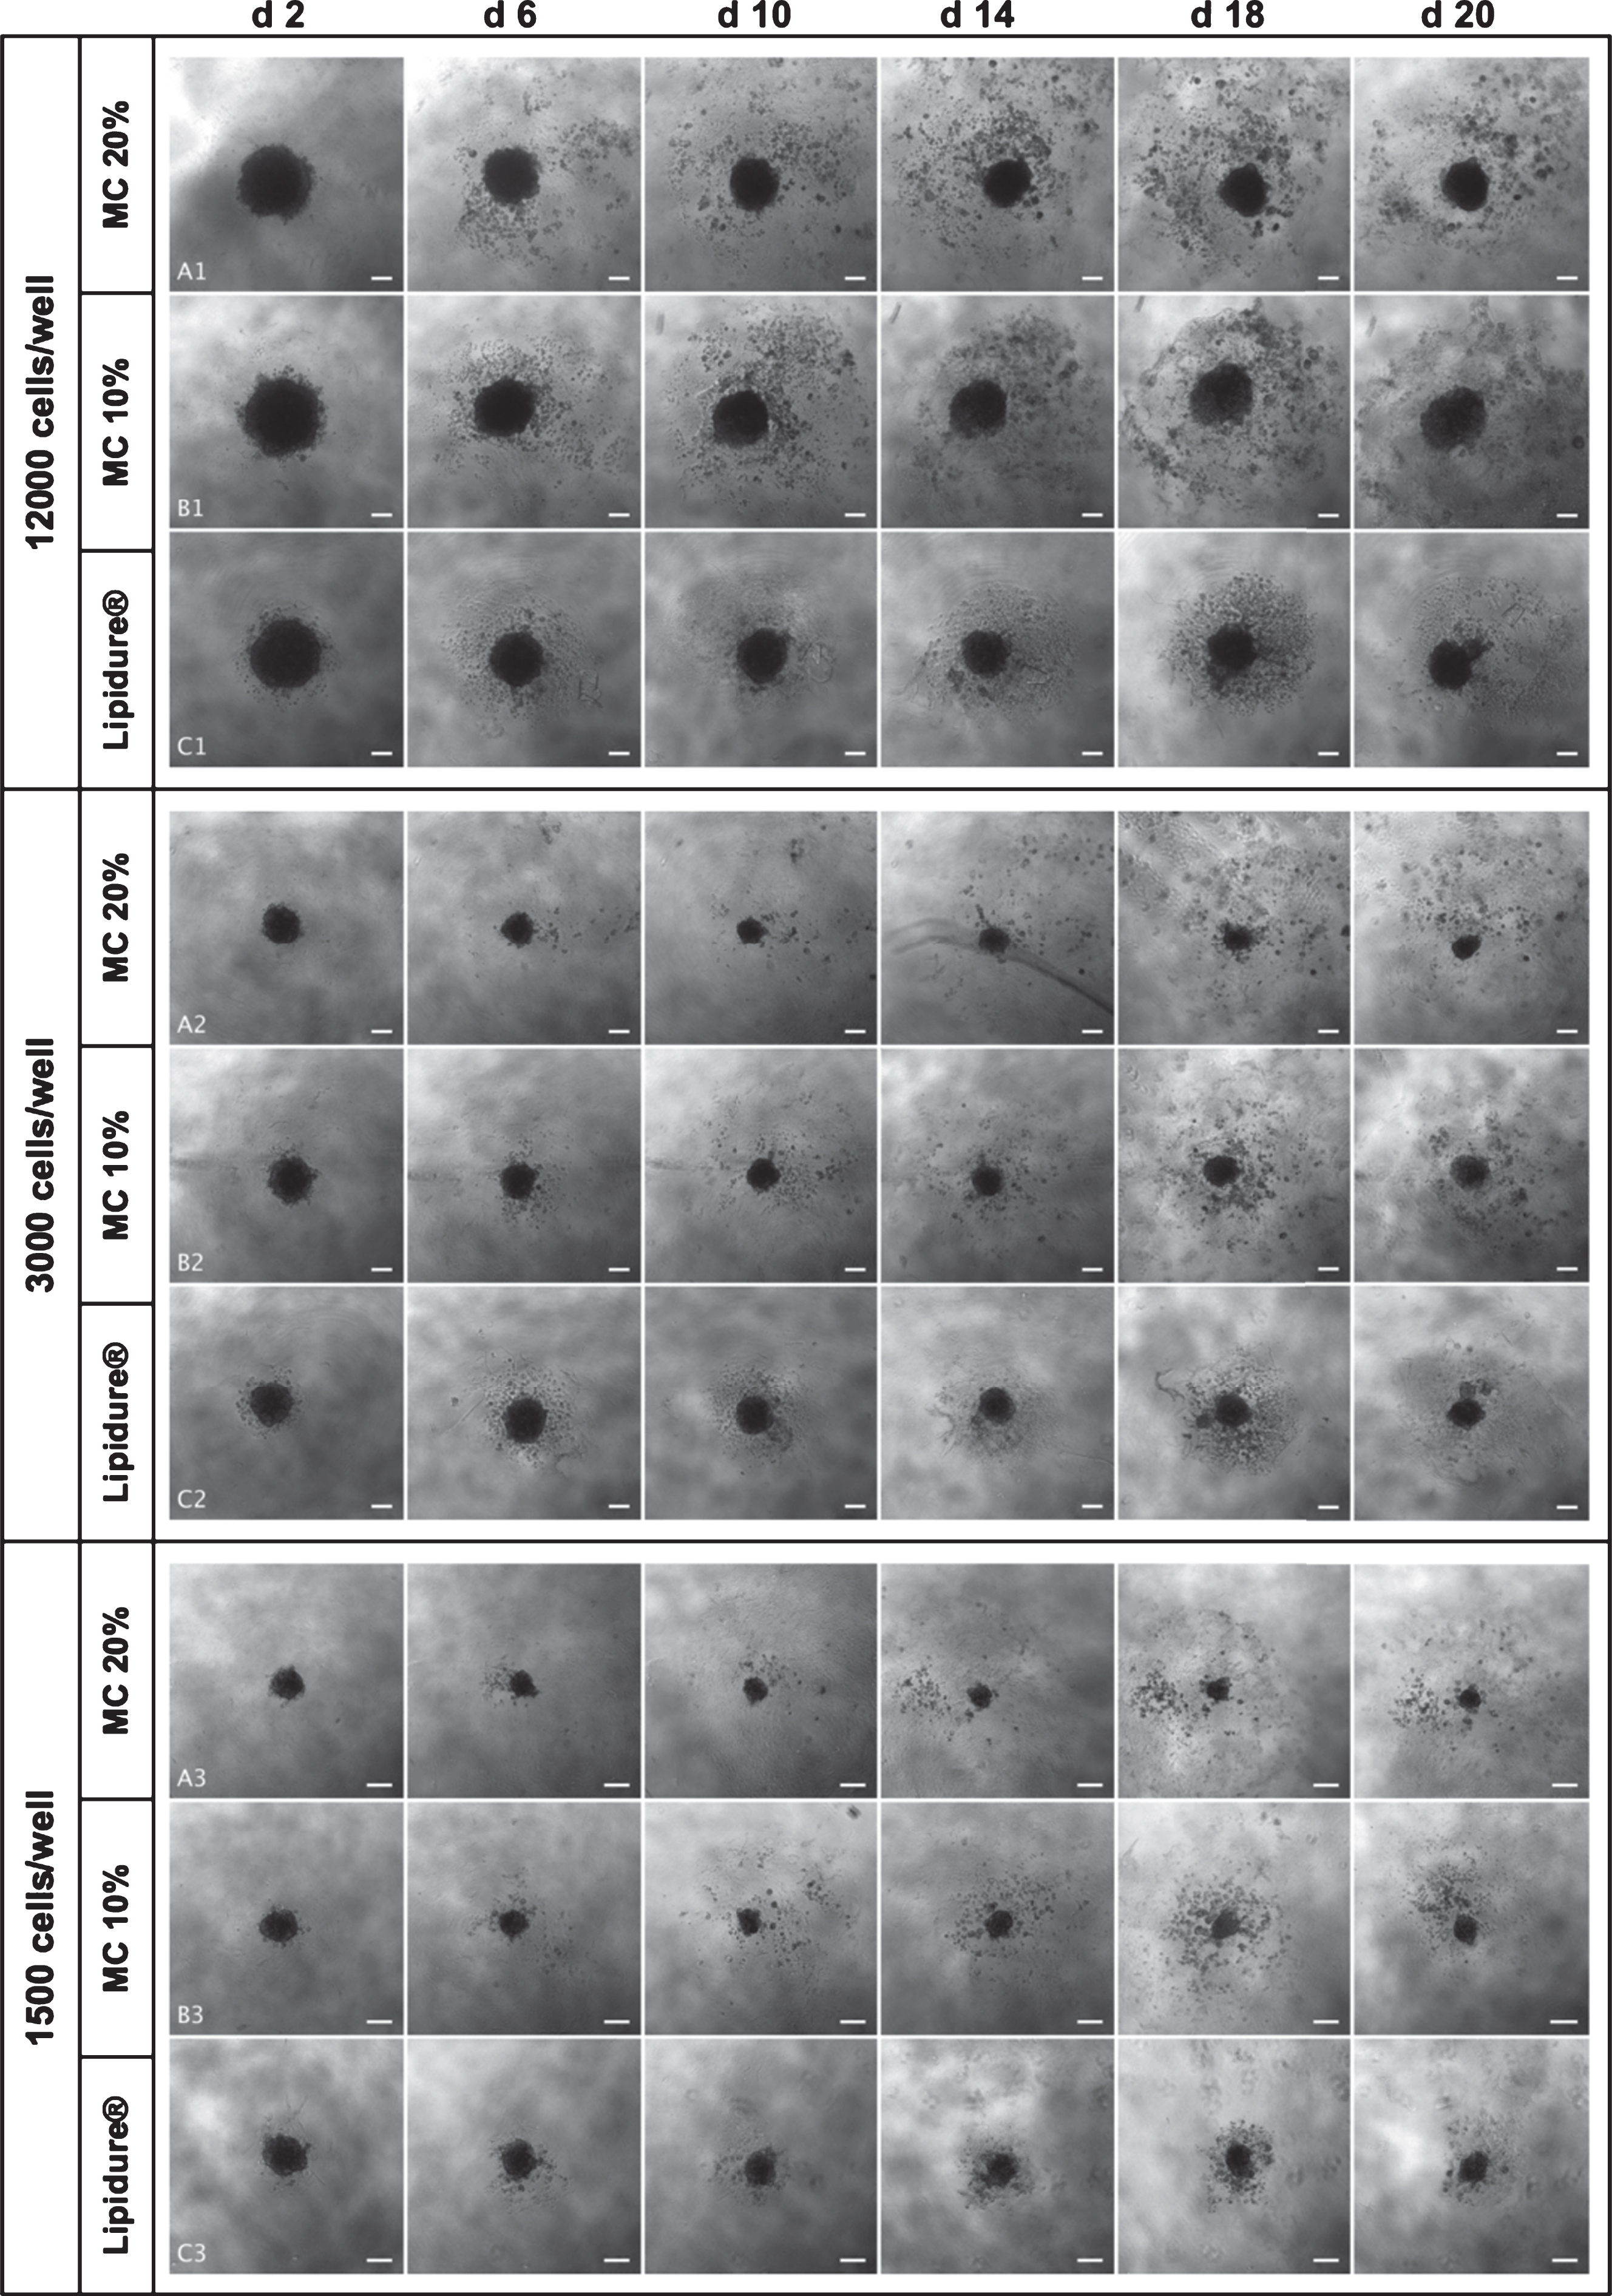 Representative phase-contrast microscopy images of in vitro generated SCC4 spheroids. The images were taken with a 5x objective. Spheroids were generated using 3 different methods: MC 20% (A1; A2; A3), MC10% (B1; B2; B3) and Lipidure© plate (C1; C2; C3). For each method, three different initial seeding densities were used (12,000, 3,000 and 1,500 cells/well). Spheroids were cultured until day 20. Only images from day 2, 6, 10, 14, 18 and 20 are shown. Scale bars correspond to 200μm.